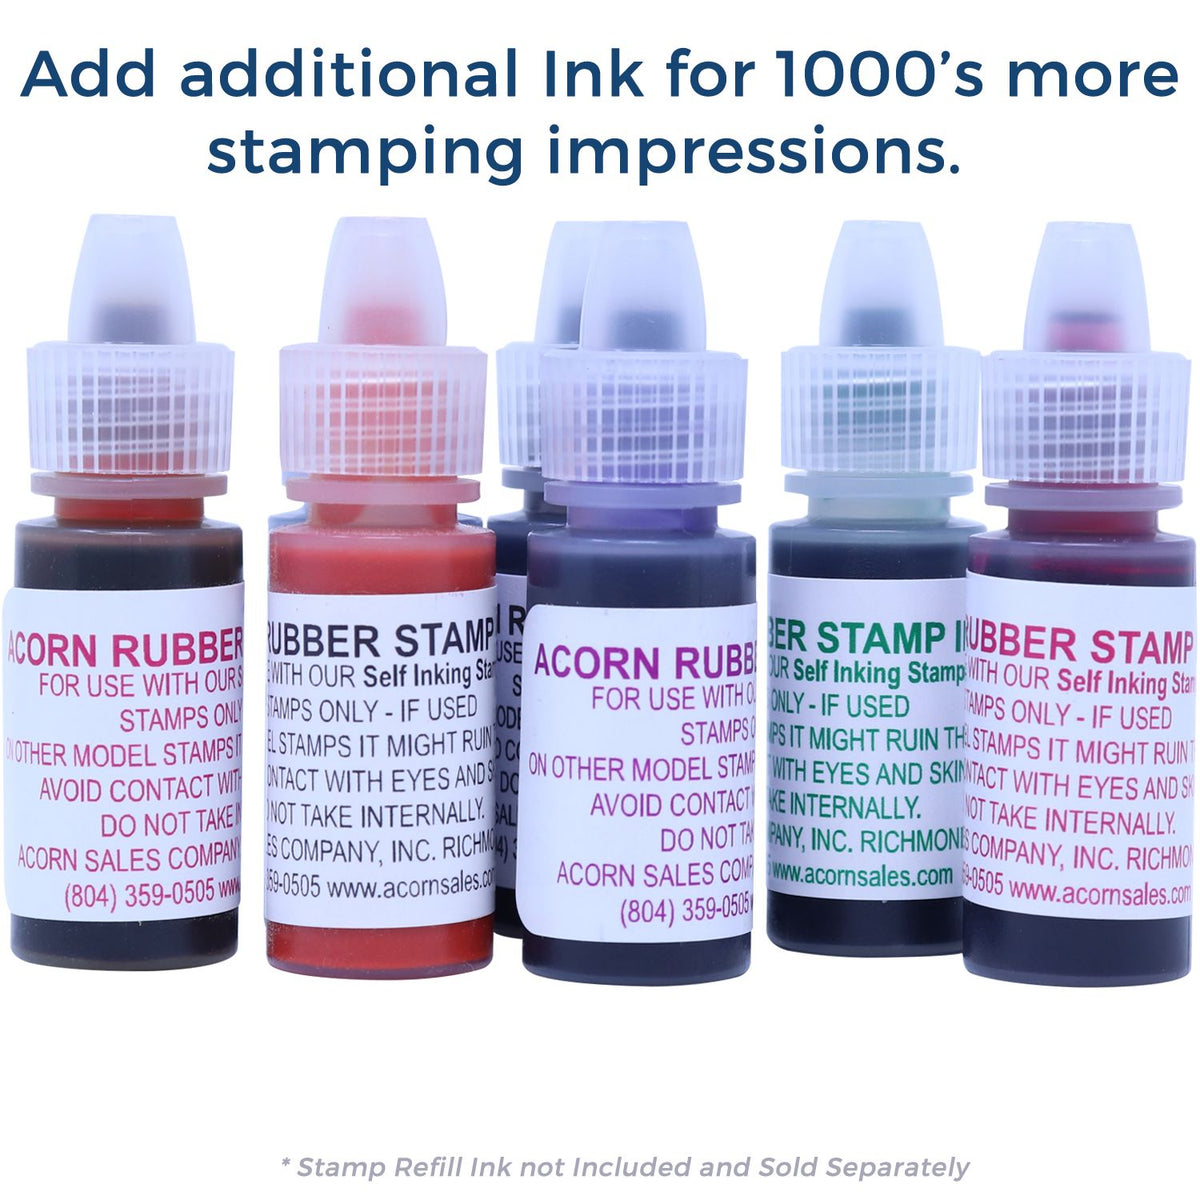 Refill Ink for Self-Inking Round Keep up the Good Work Smiley Stamp Available